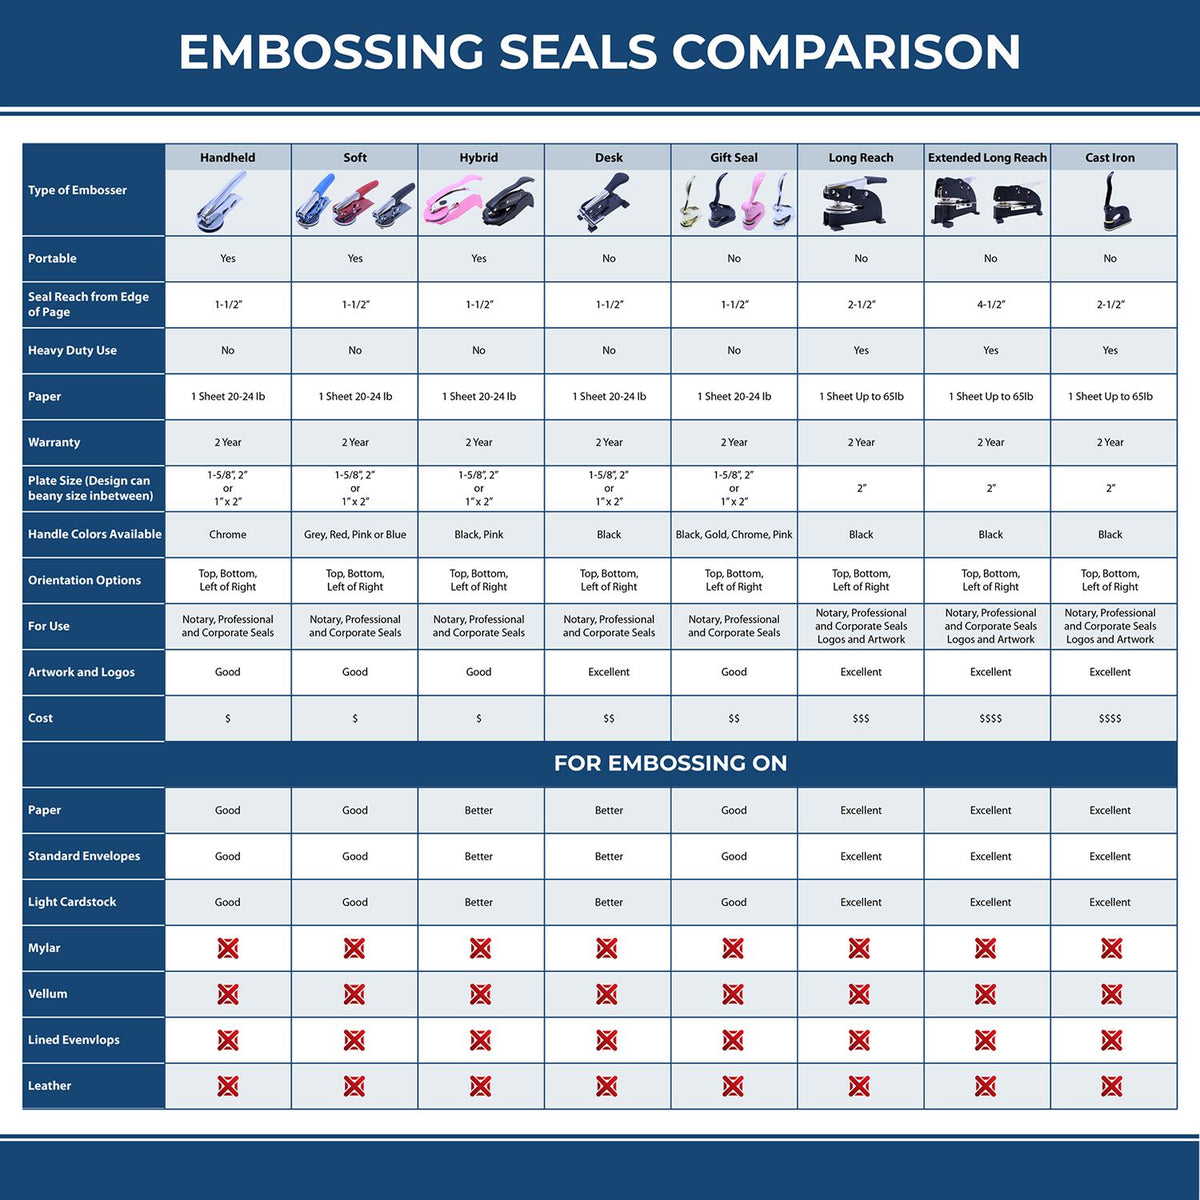 A comparison chart for the different types of mount models available for the Hybrid Indiana Land Surveyor Seal